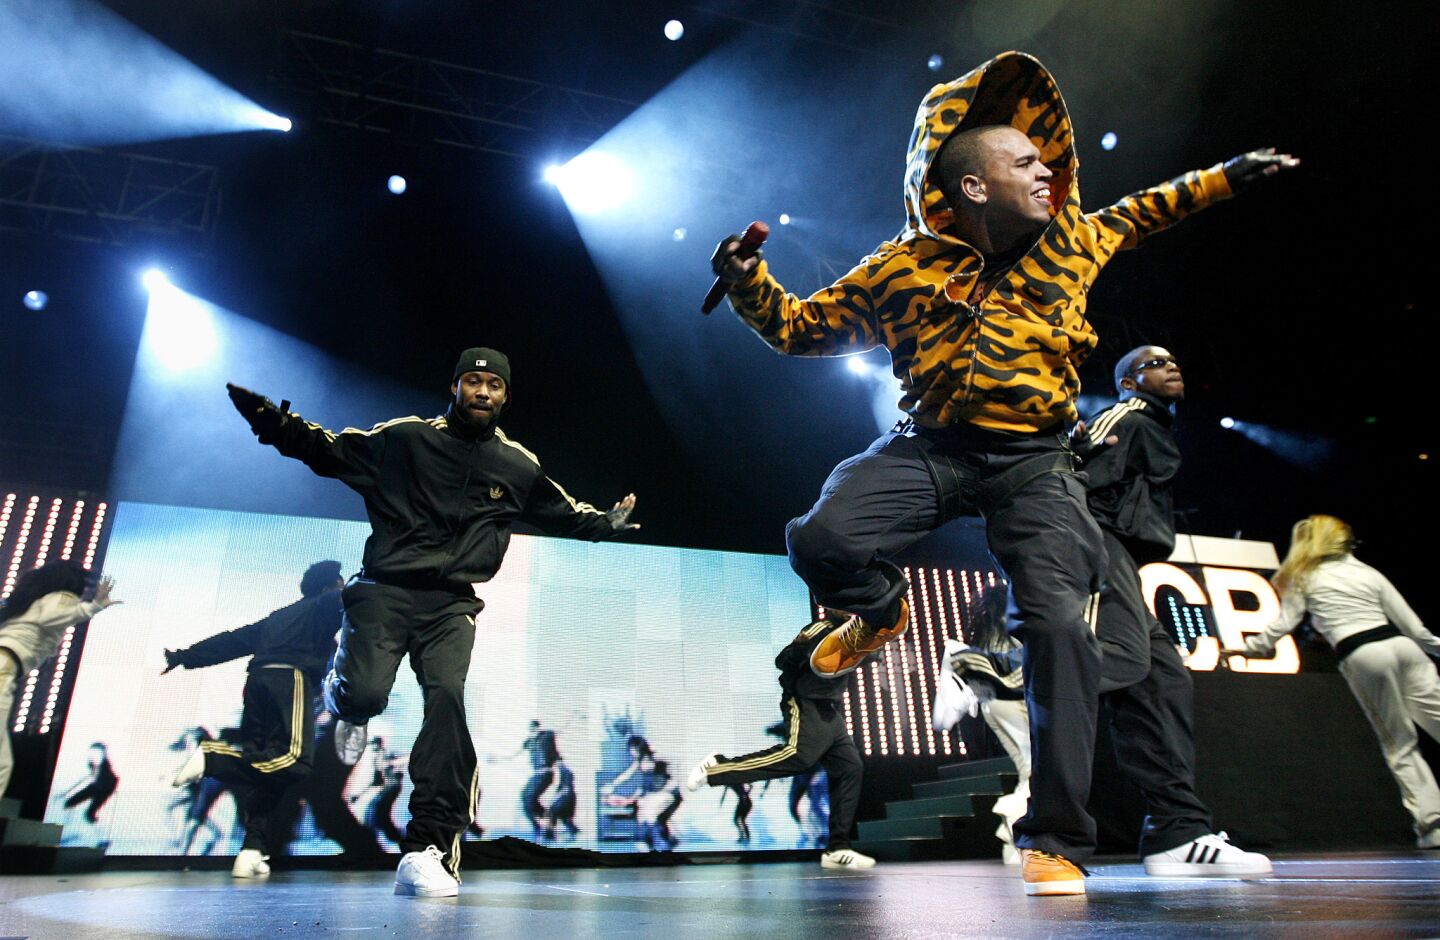 Following in the tradition of Michael Jackson, Usher and Justin Timberlake, Brown's dance floor prowess played into his pop persona as much as his high notes. His breakout performance at the 2007 MTV Video Awards included a stunt-heavy dance medley and a "Billie Jean" tribute.